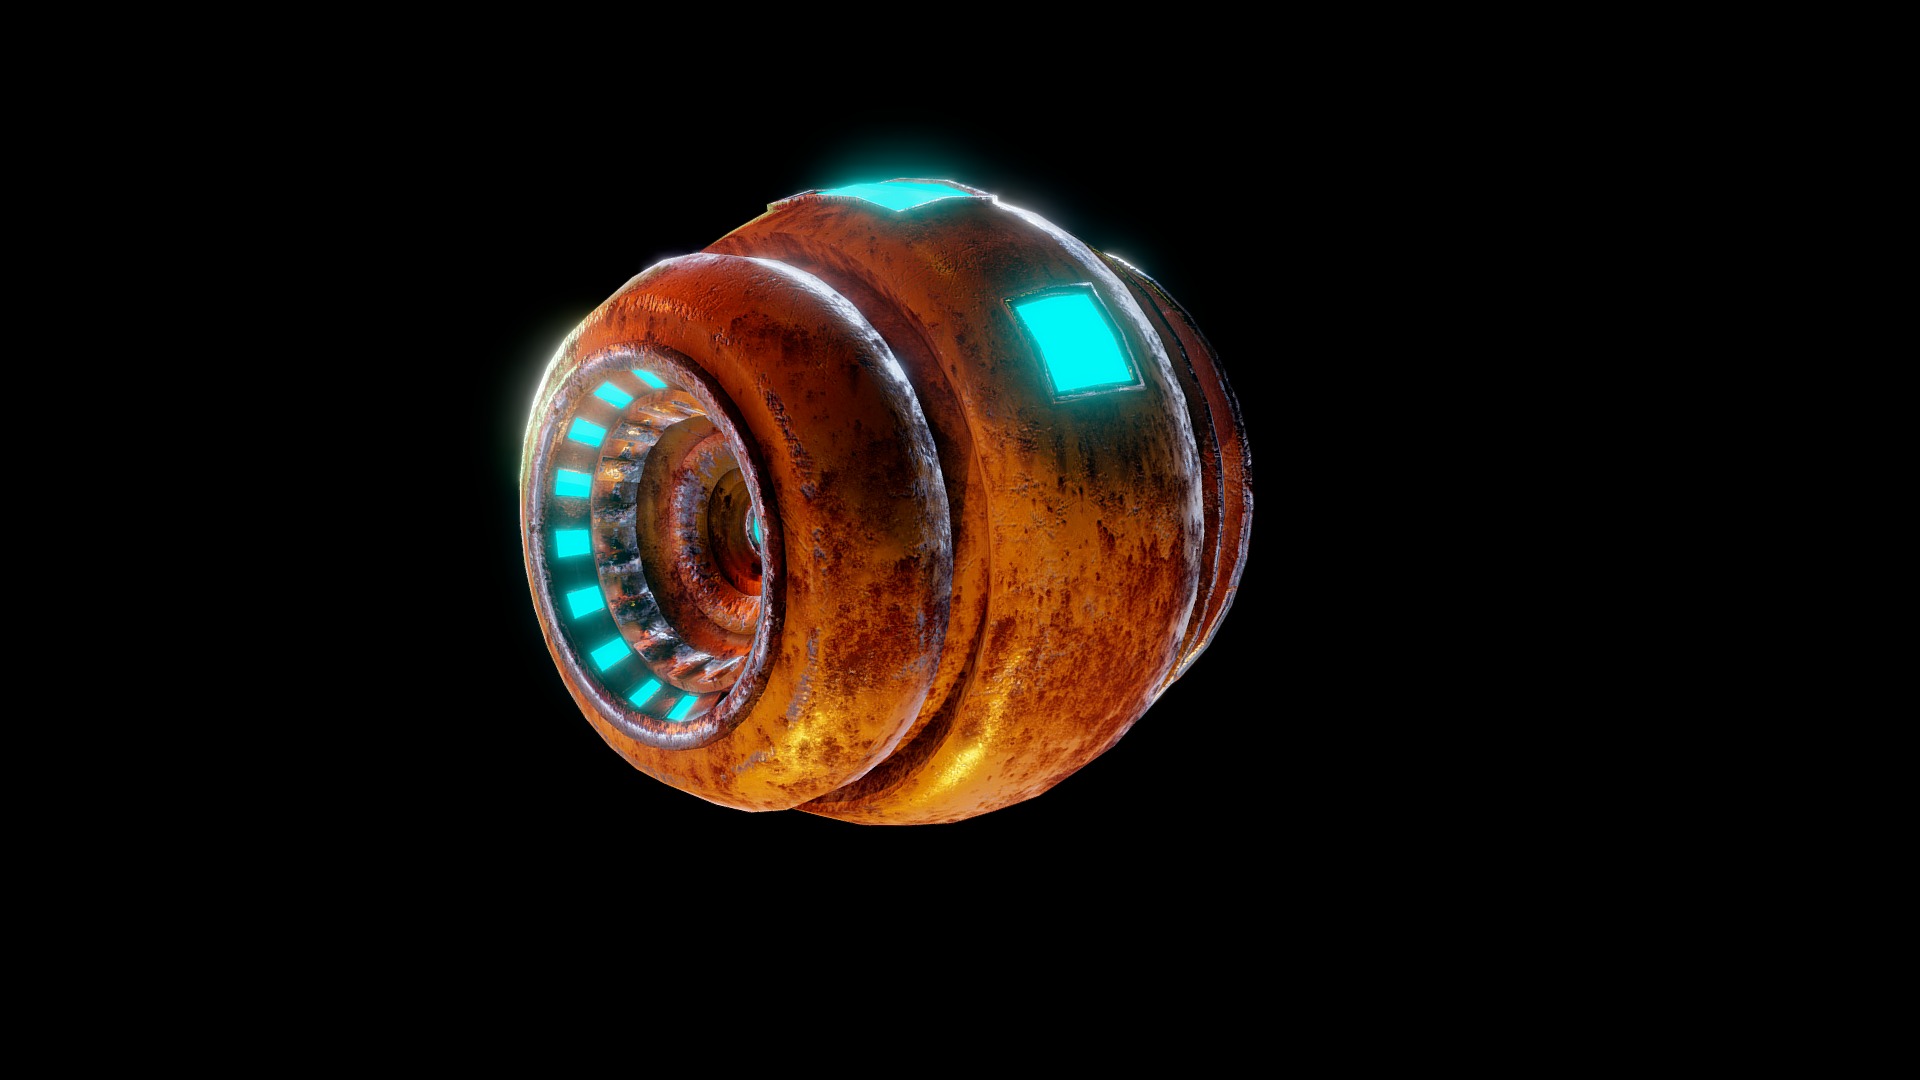 3D model patrol drone game engine textures - This is a 3D model of the patrol drone game engine textures. The 3D model is about a planet with rings around it.